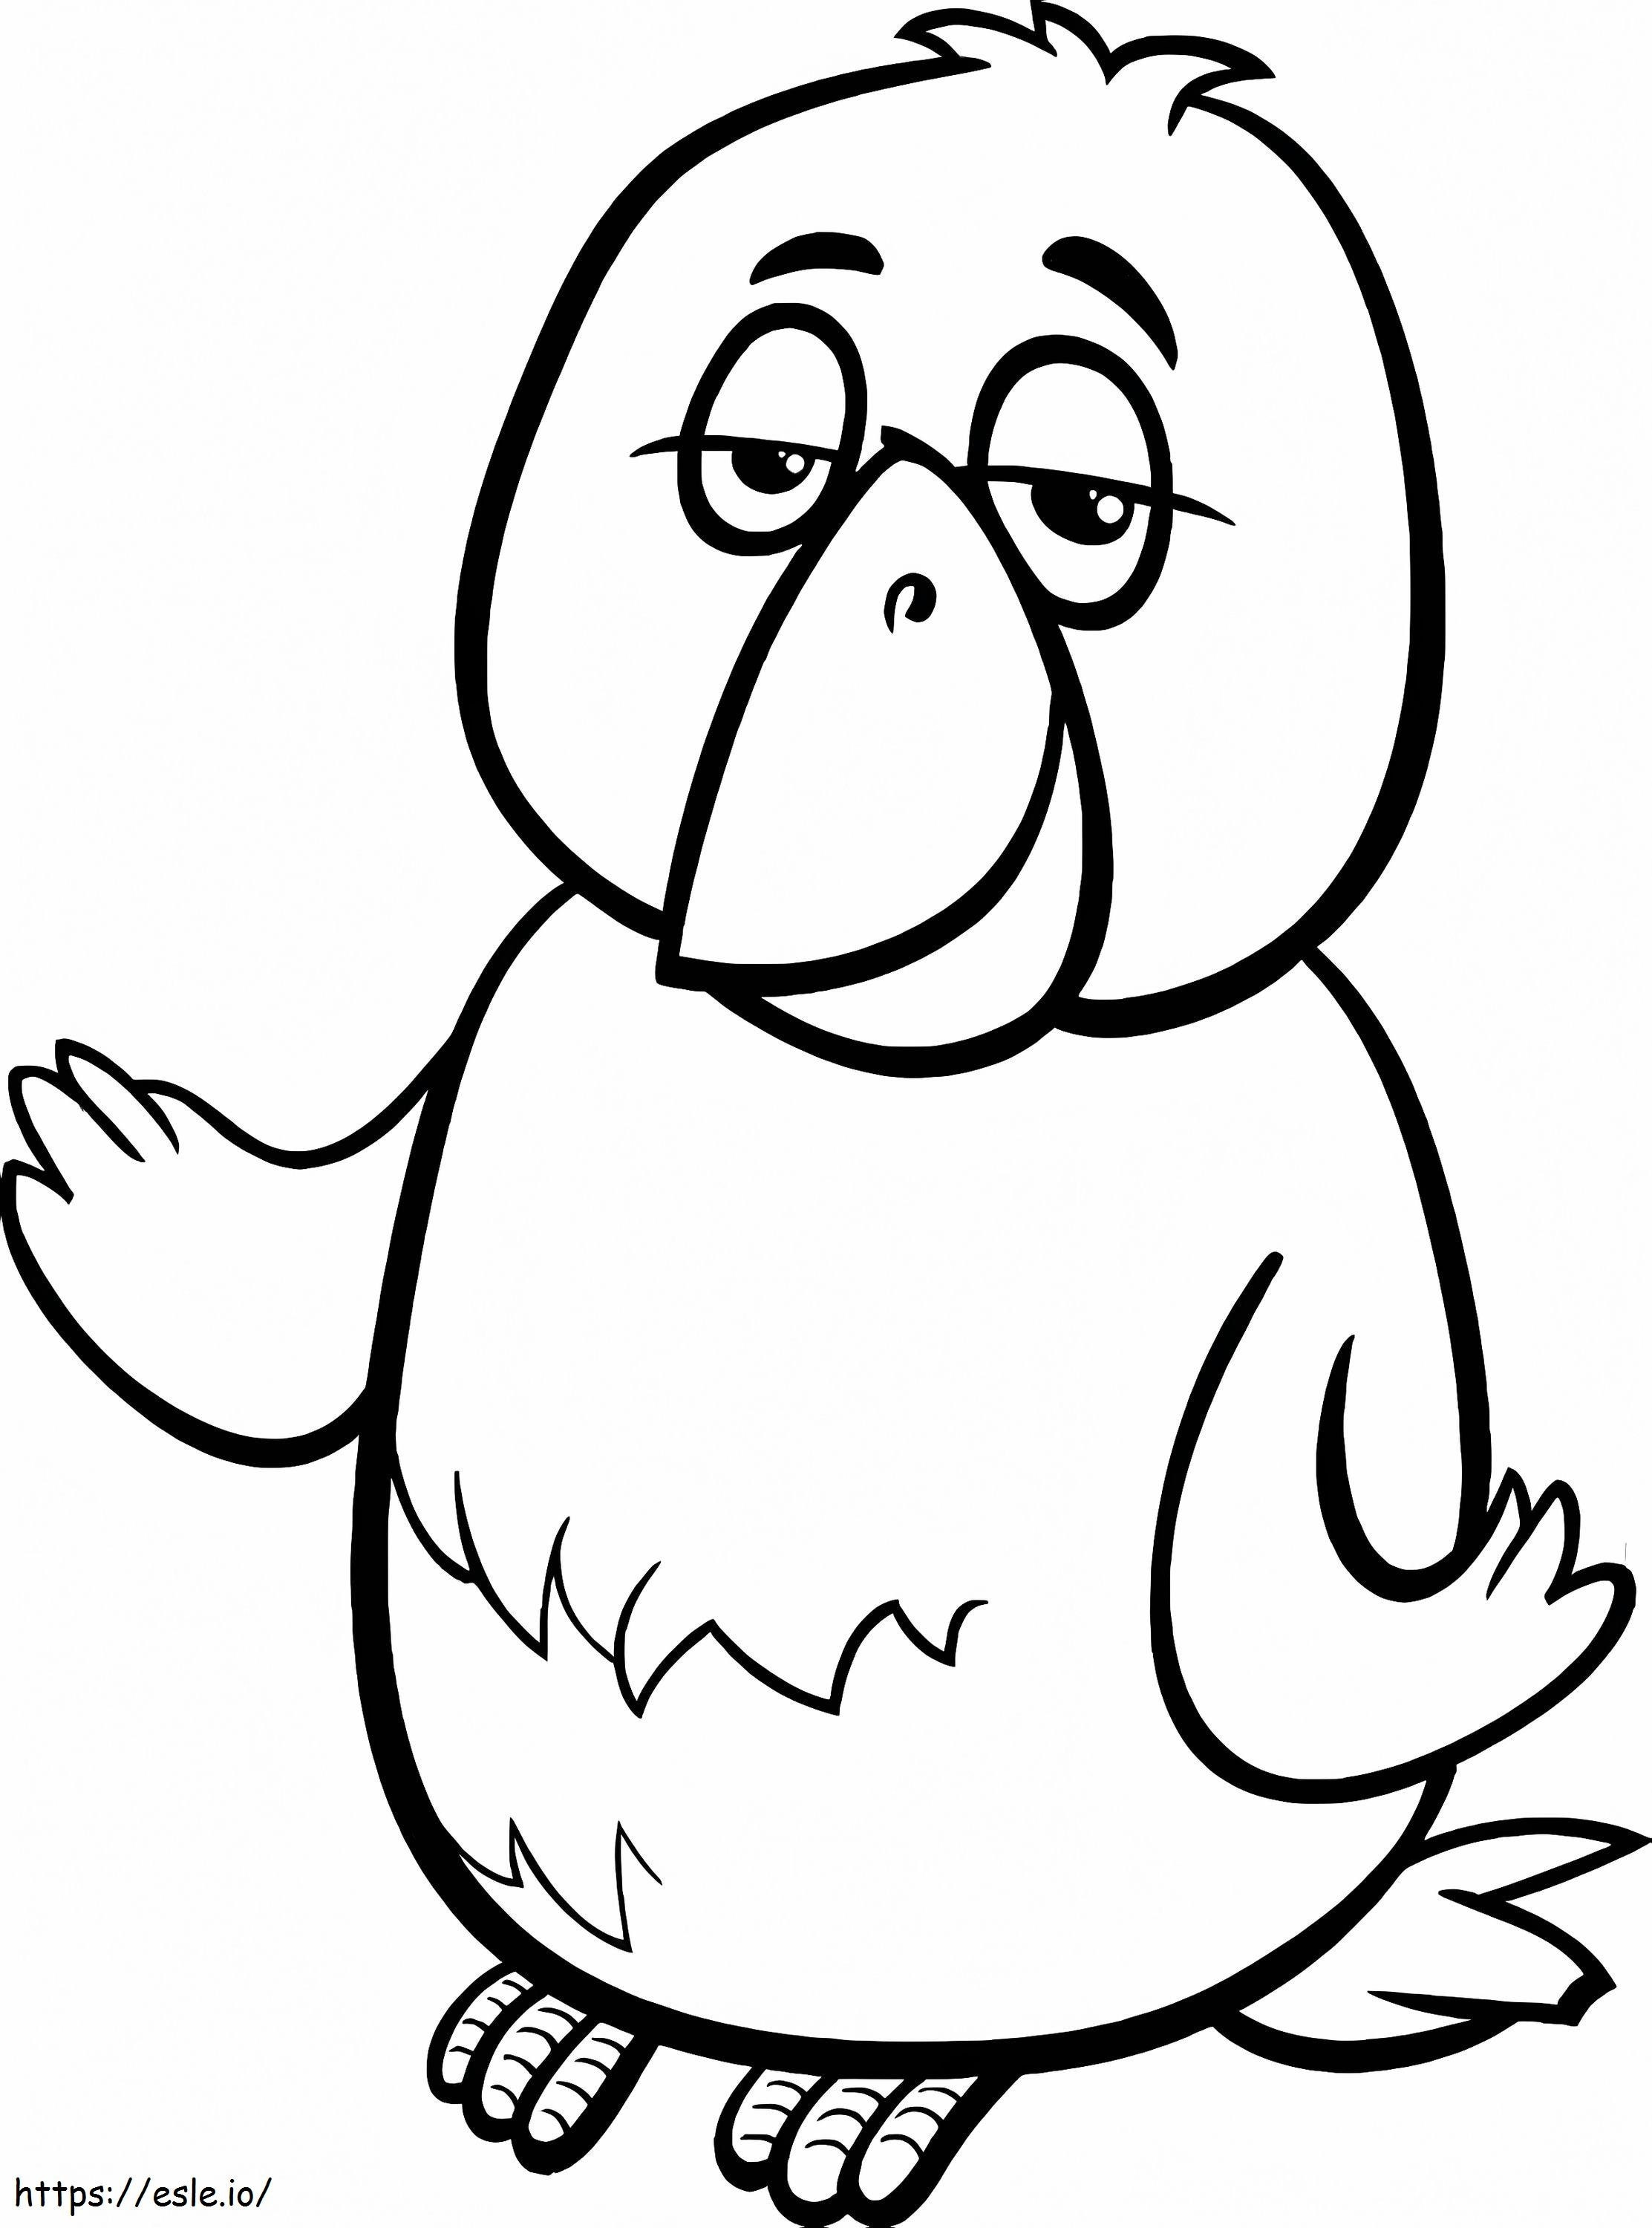 Stupid Bird Canary coloring page